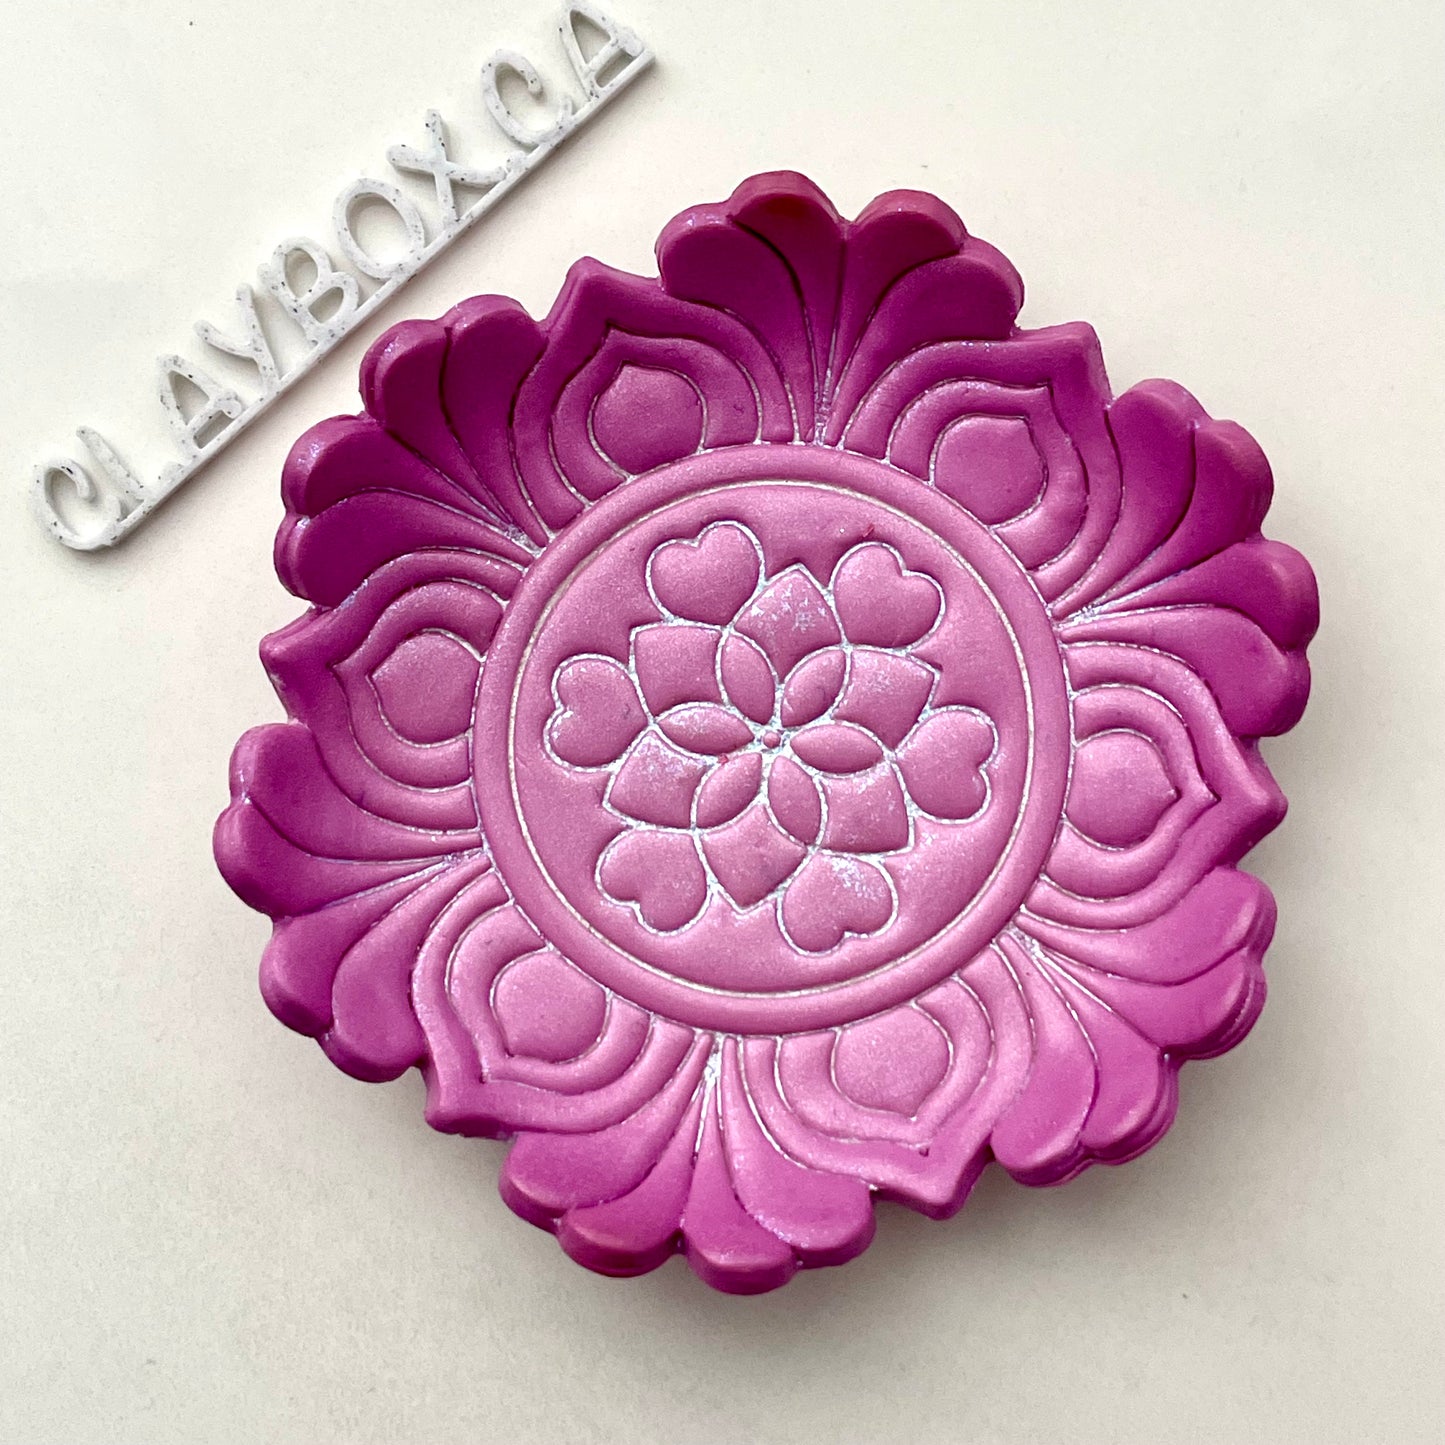 Henna mandala #3 large stamp and matching cutter - made for use with polymer clay